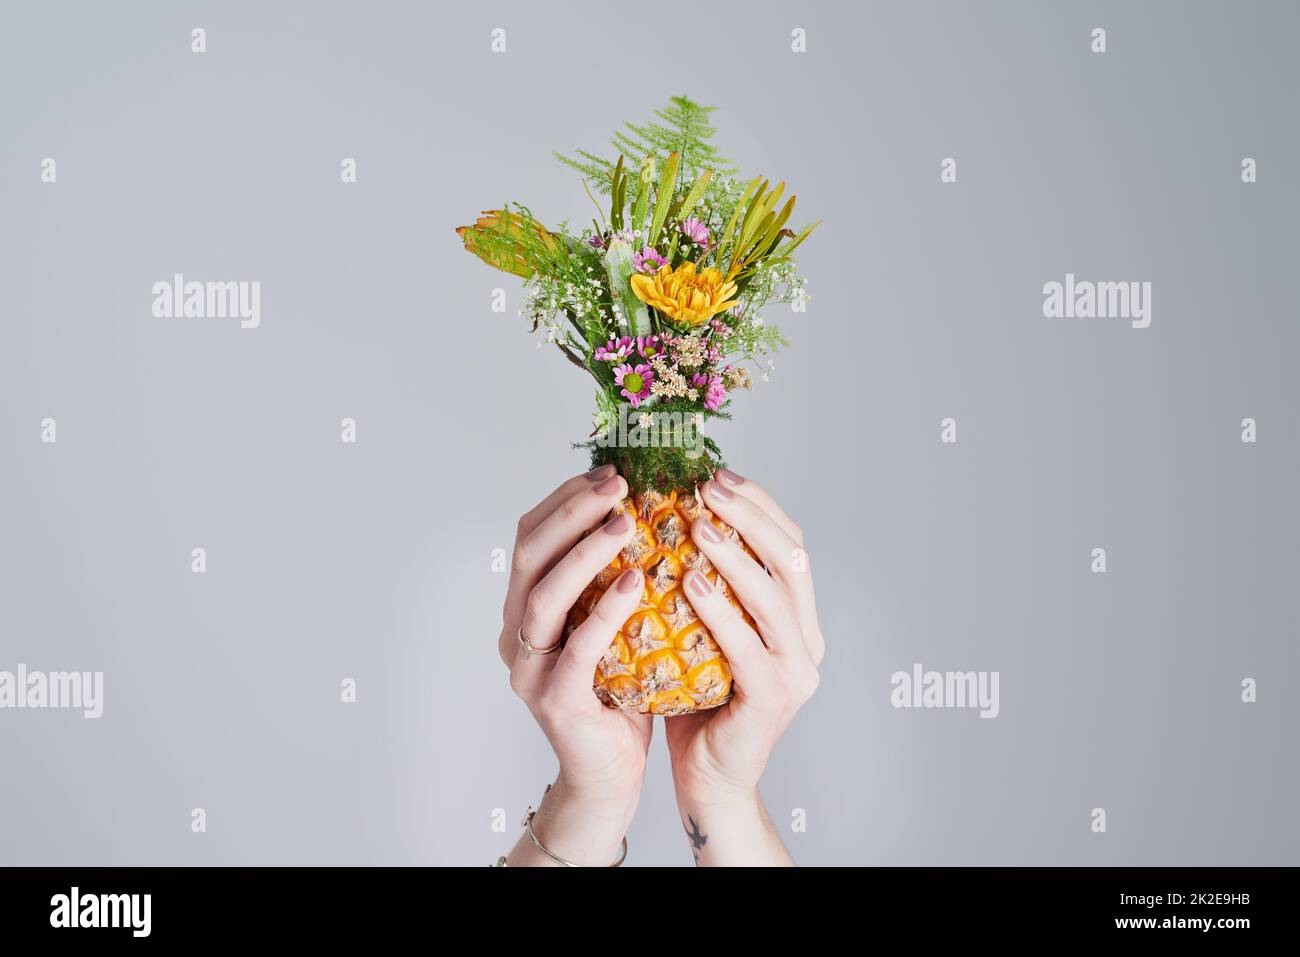 For the love of all things beautiful and natural. Shot of an unrecognizable woman holding a pineapple stuffed with flowers. Stock Photo